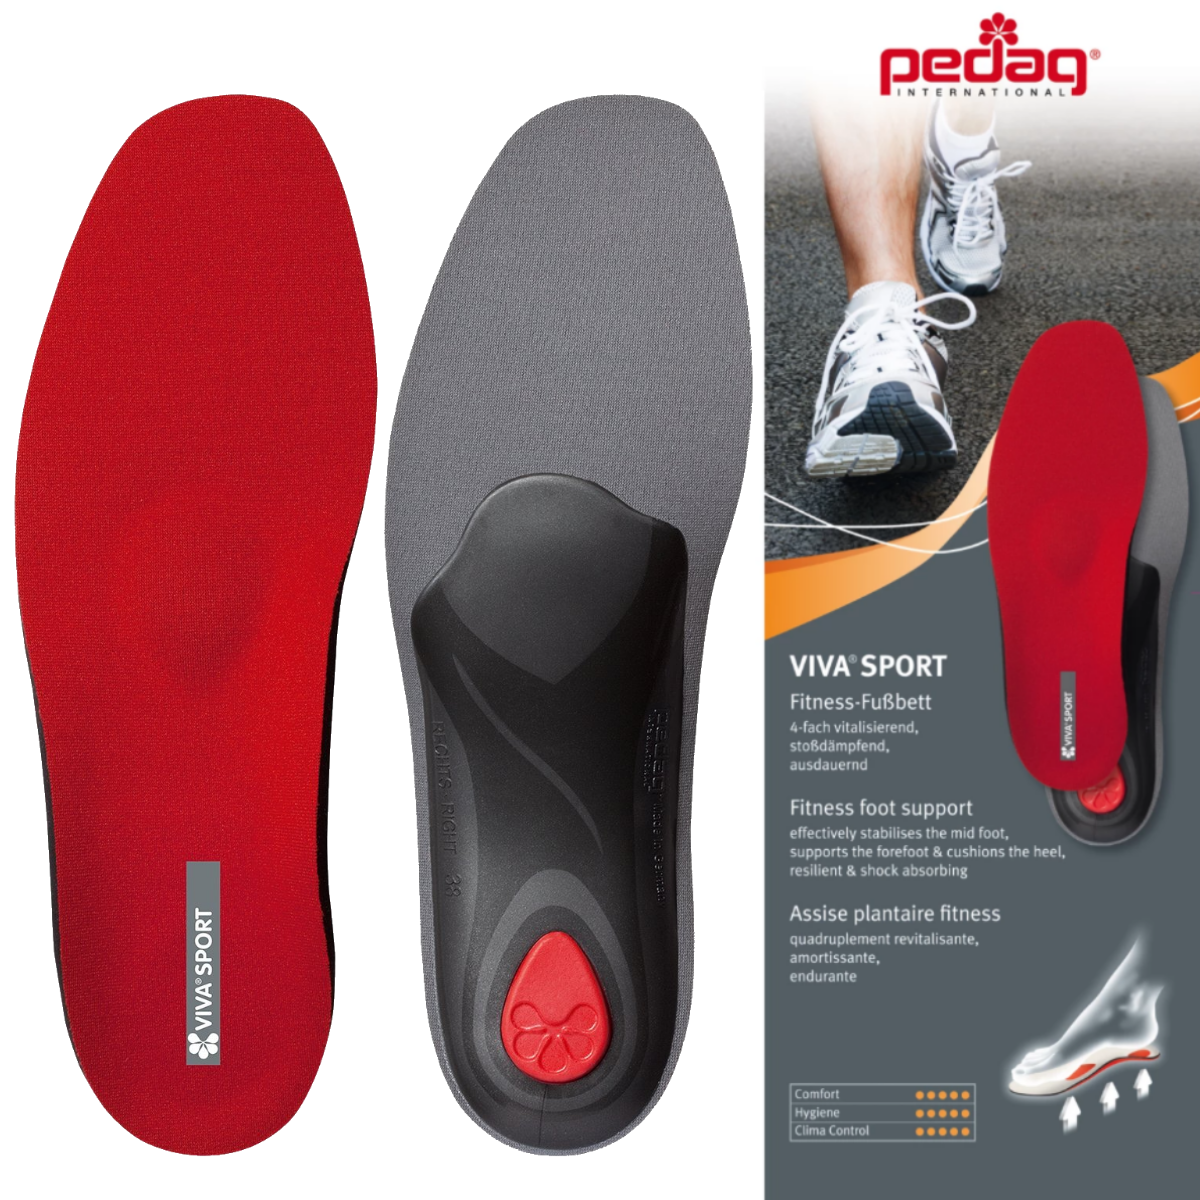 Pedag VIVA Sport - shock absorbing supportive orthotic insole for all sports - $29.99